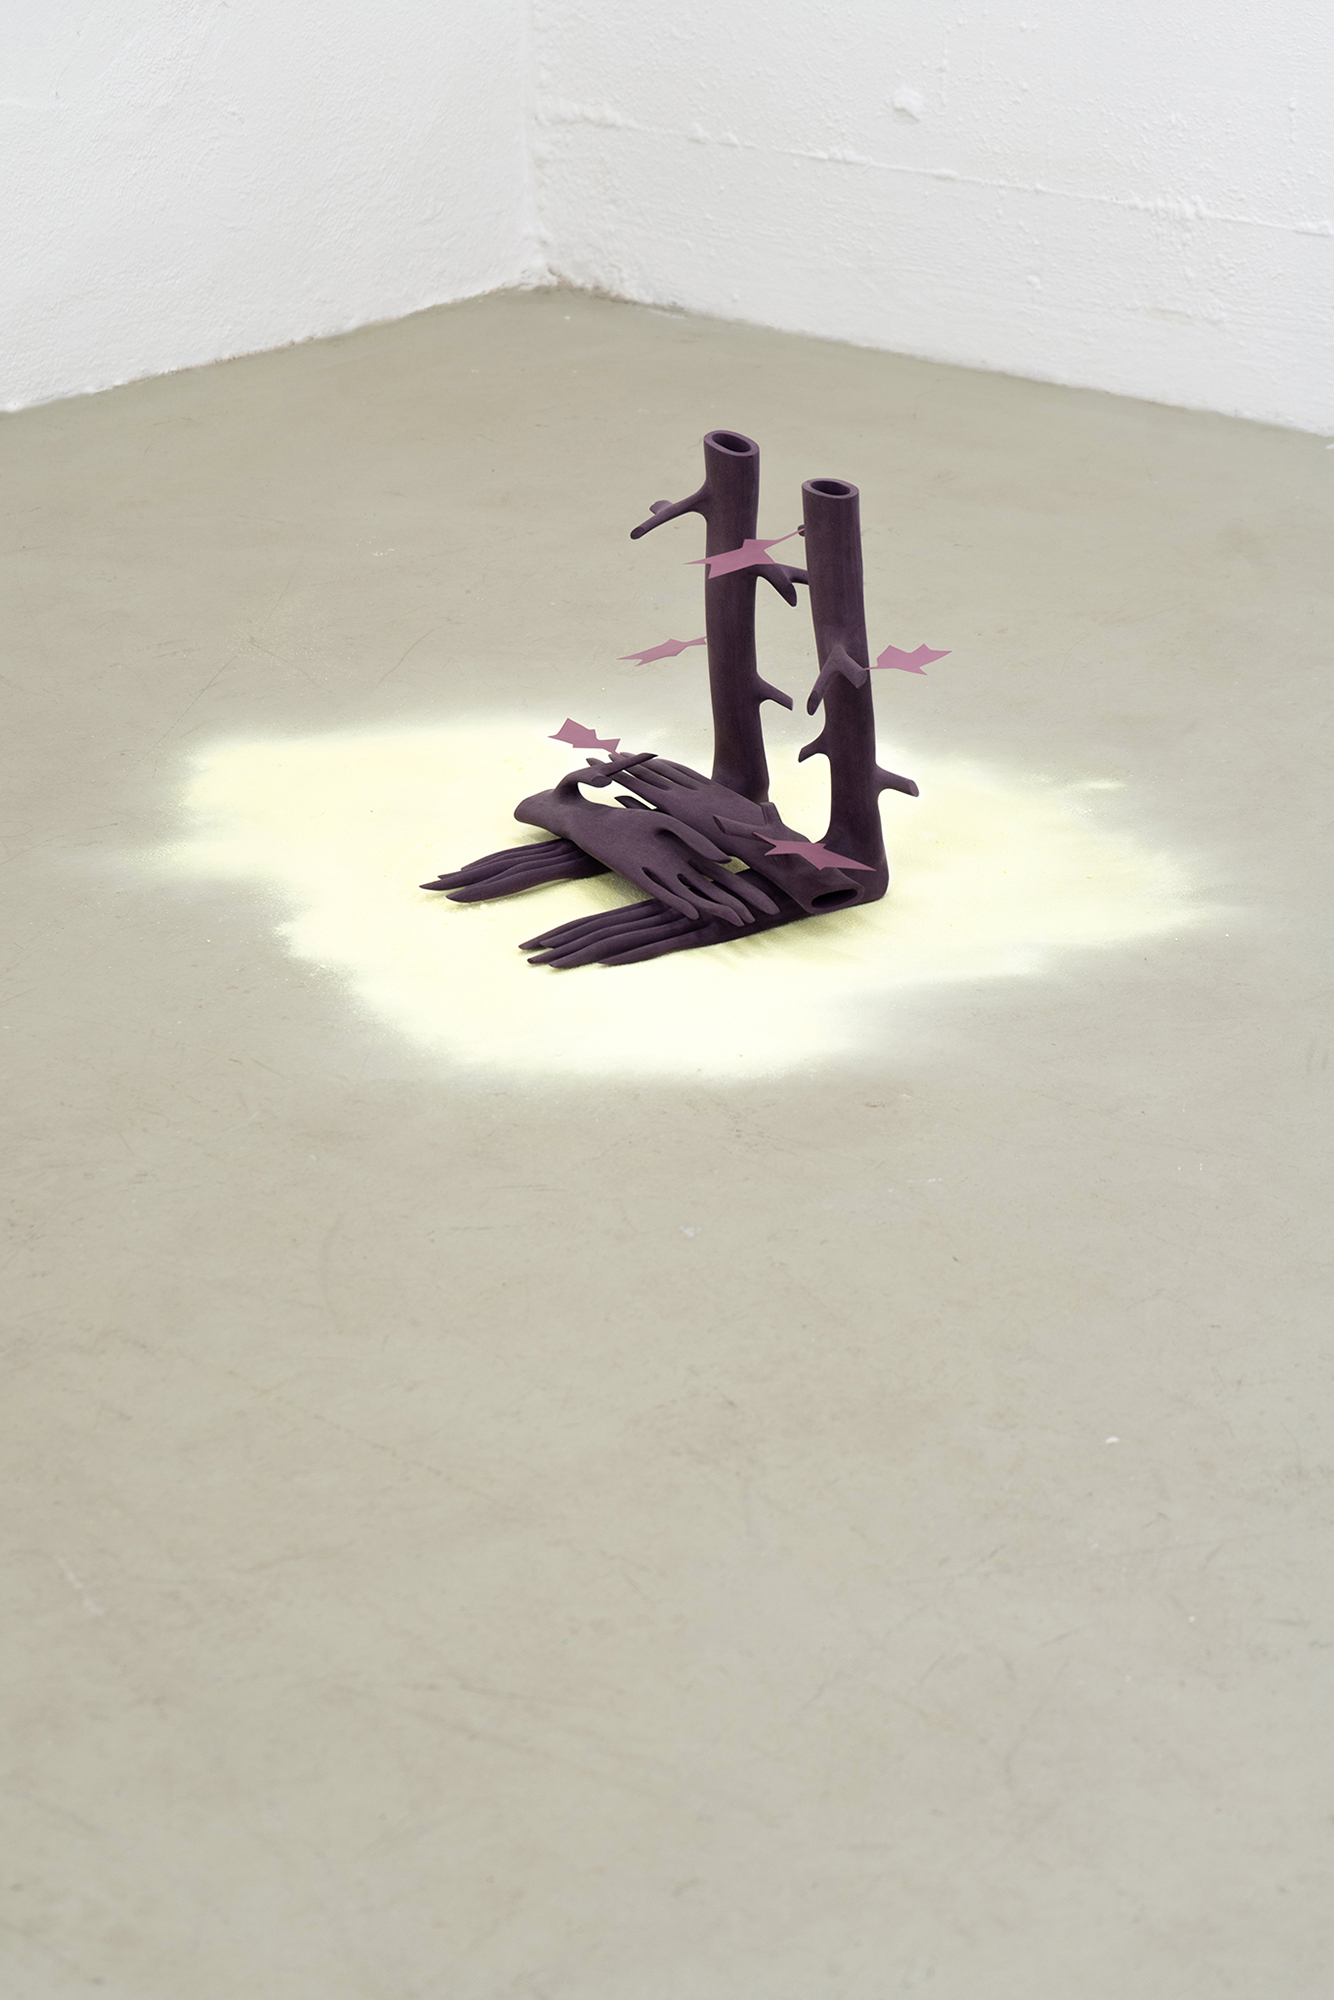 Lukas Hoffmann, untitled, 2021, sulfur, MDF dyed through, aluminum sheet painted, 100 x 100 x 40 cm